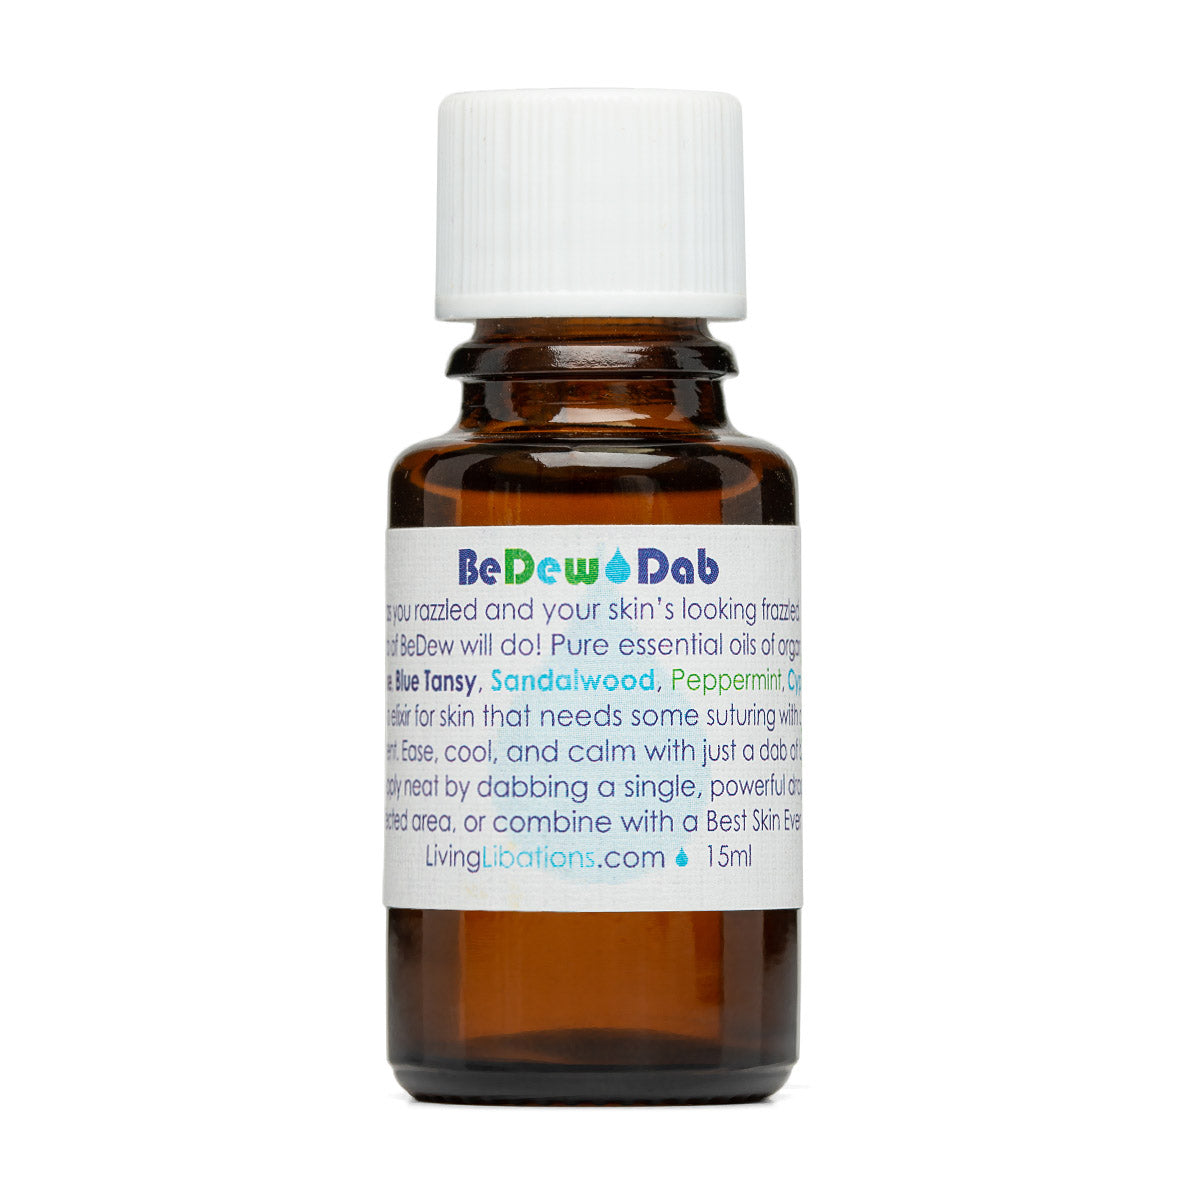 Be Dew Dab | Living Libations | Raw Living UK | Beauty | Skin Care | Living Libation&#39;s BeDew Dab: a Natural, Vegan Spot Treatment for Itchy, Inflamed Skin. Cooling, Calming &amp; Crafted with Pure, Undiluted, Organic Essential Oils.